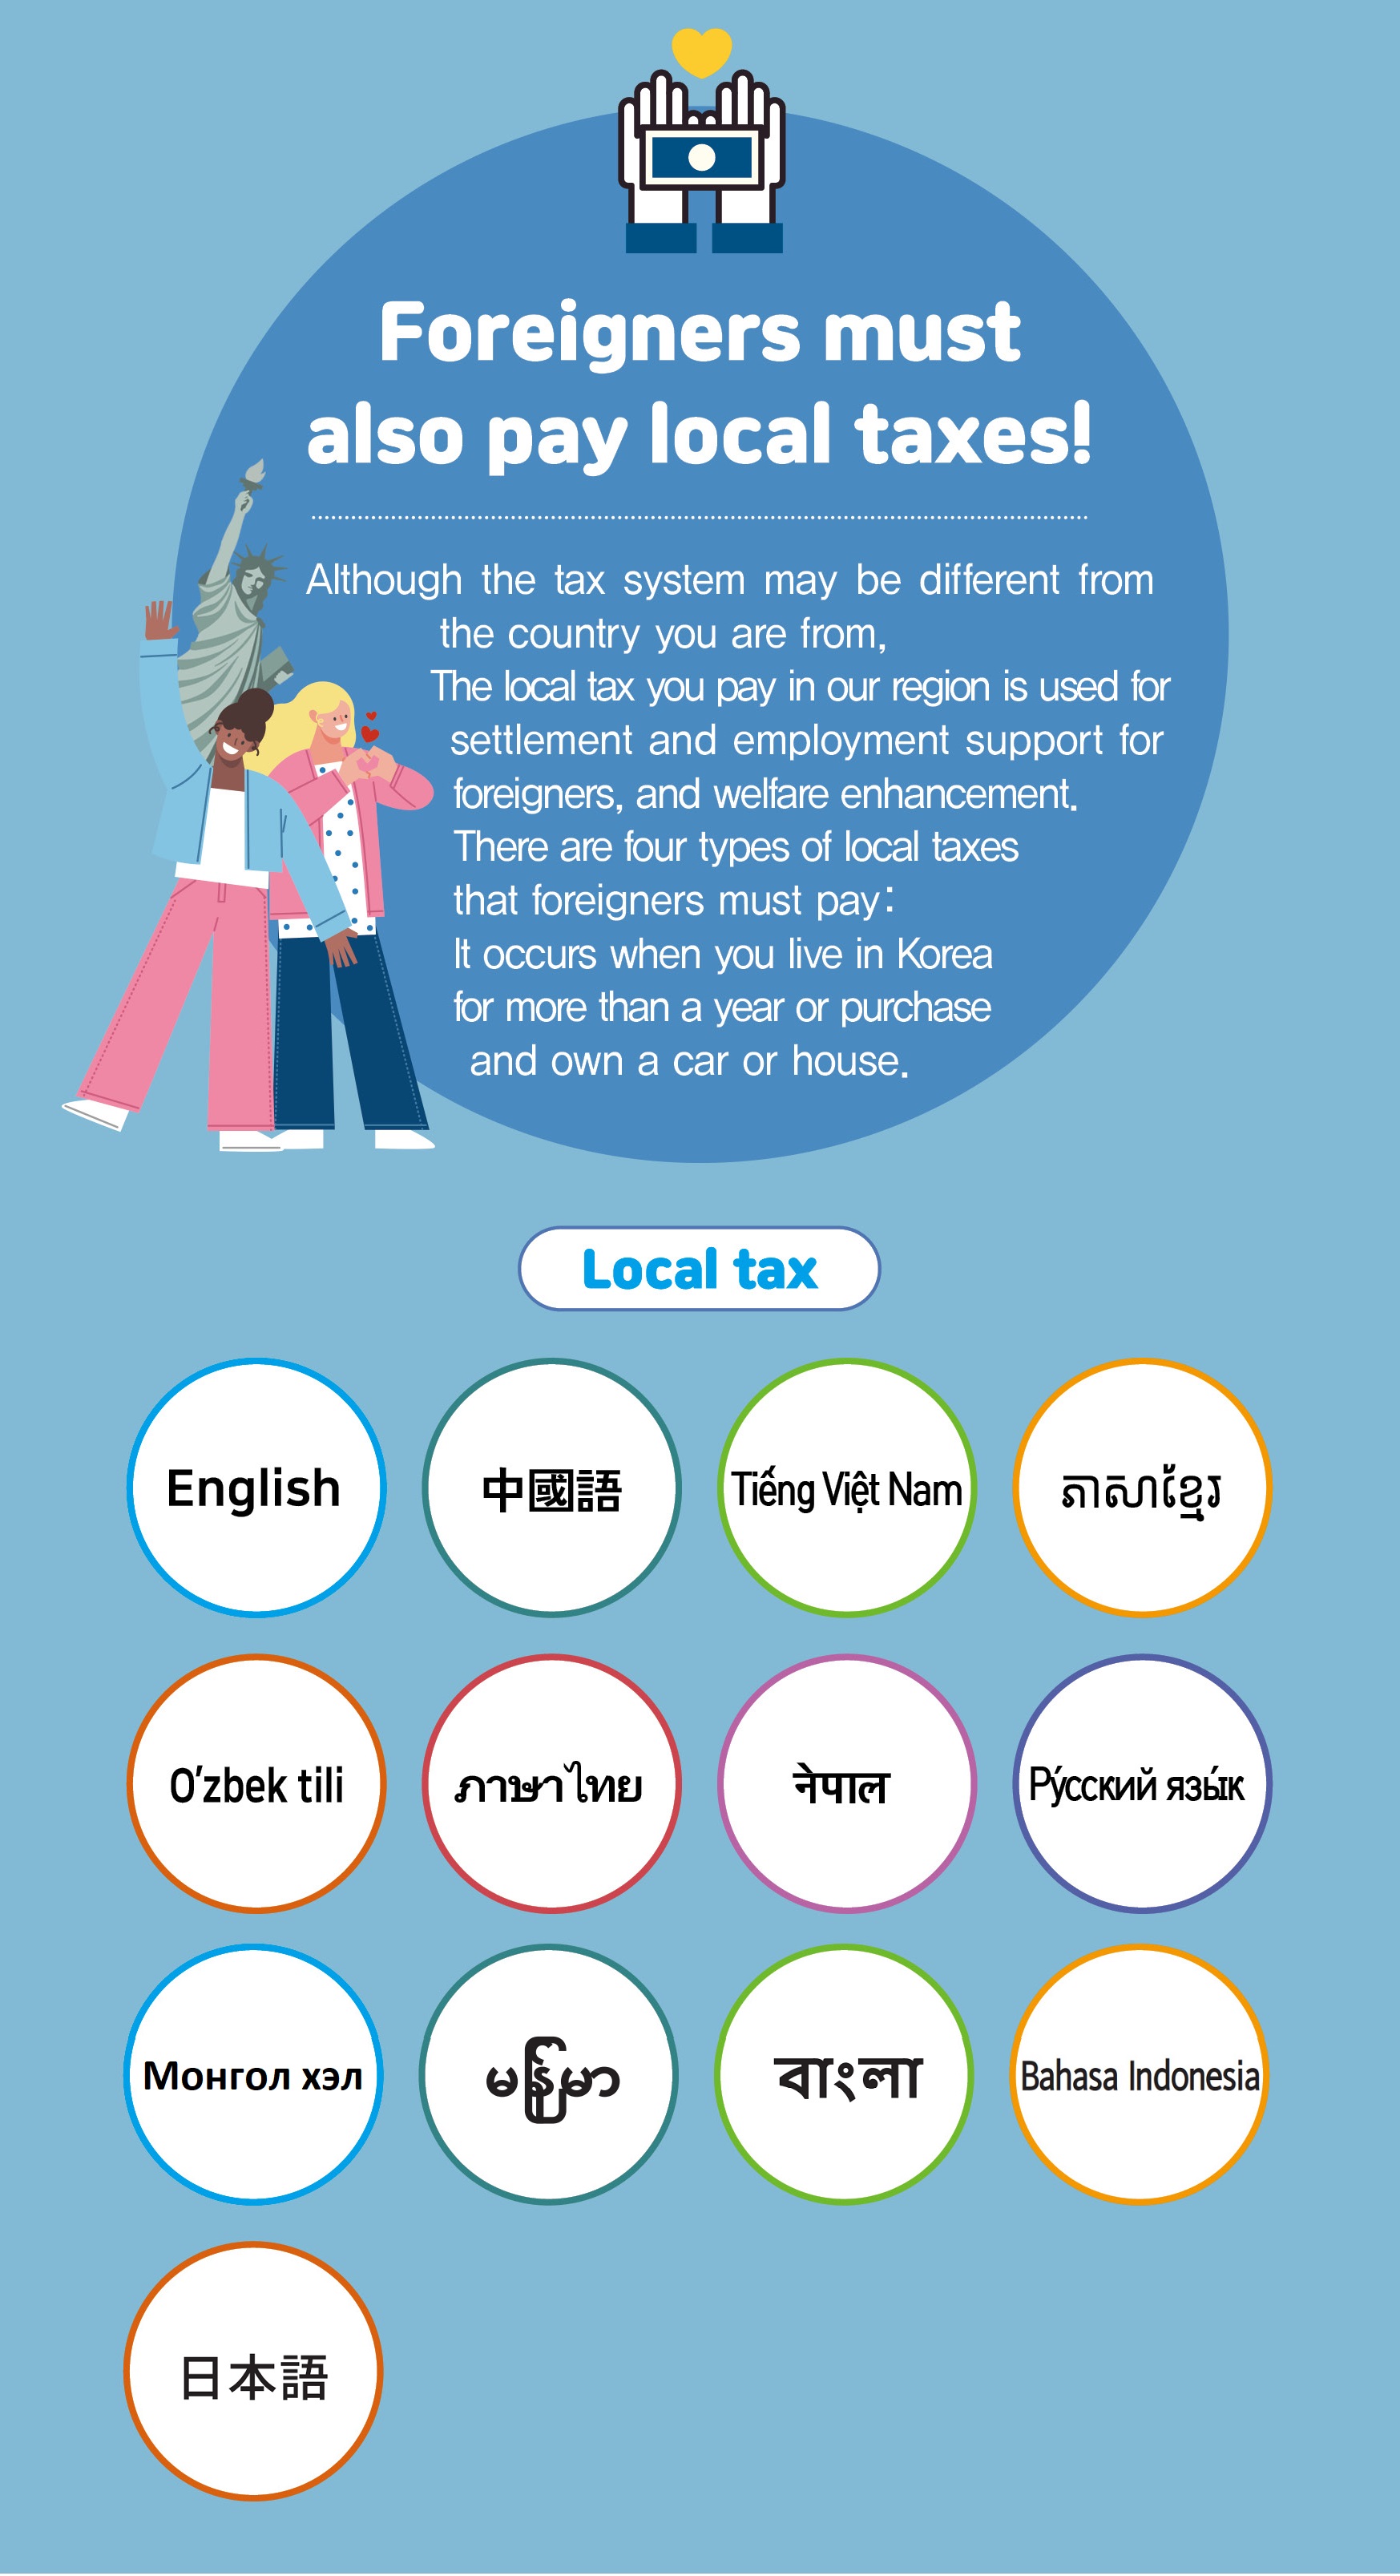 foreigners must also pay local taxes! although the tax system may be different from the country you are from. the local tax you payu in our region is used for settlement and employment support for foreigners, and welfare enhancement. there are four types of local taxes that foreigners must pay: it occurs when you live in korea for more than a year or purchase and own a car or house. local tax